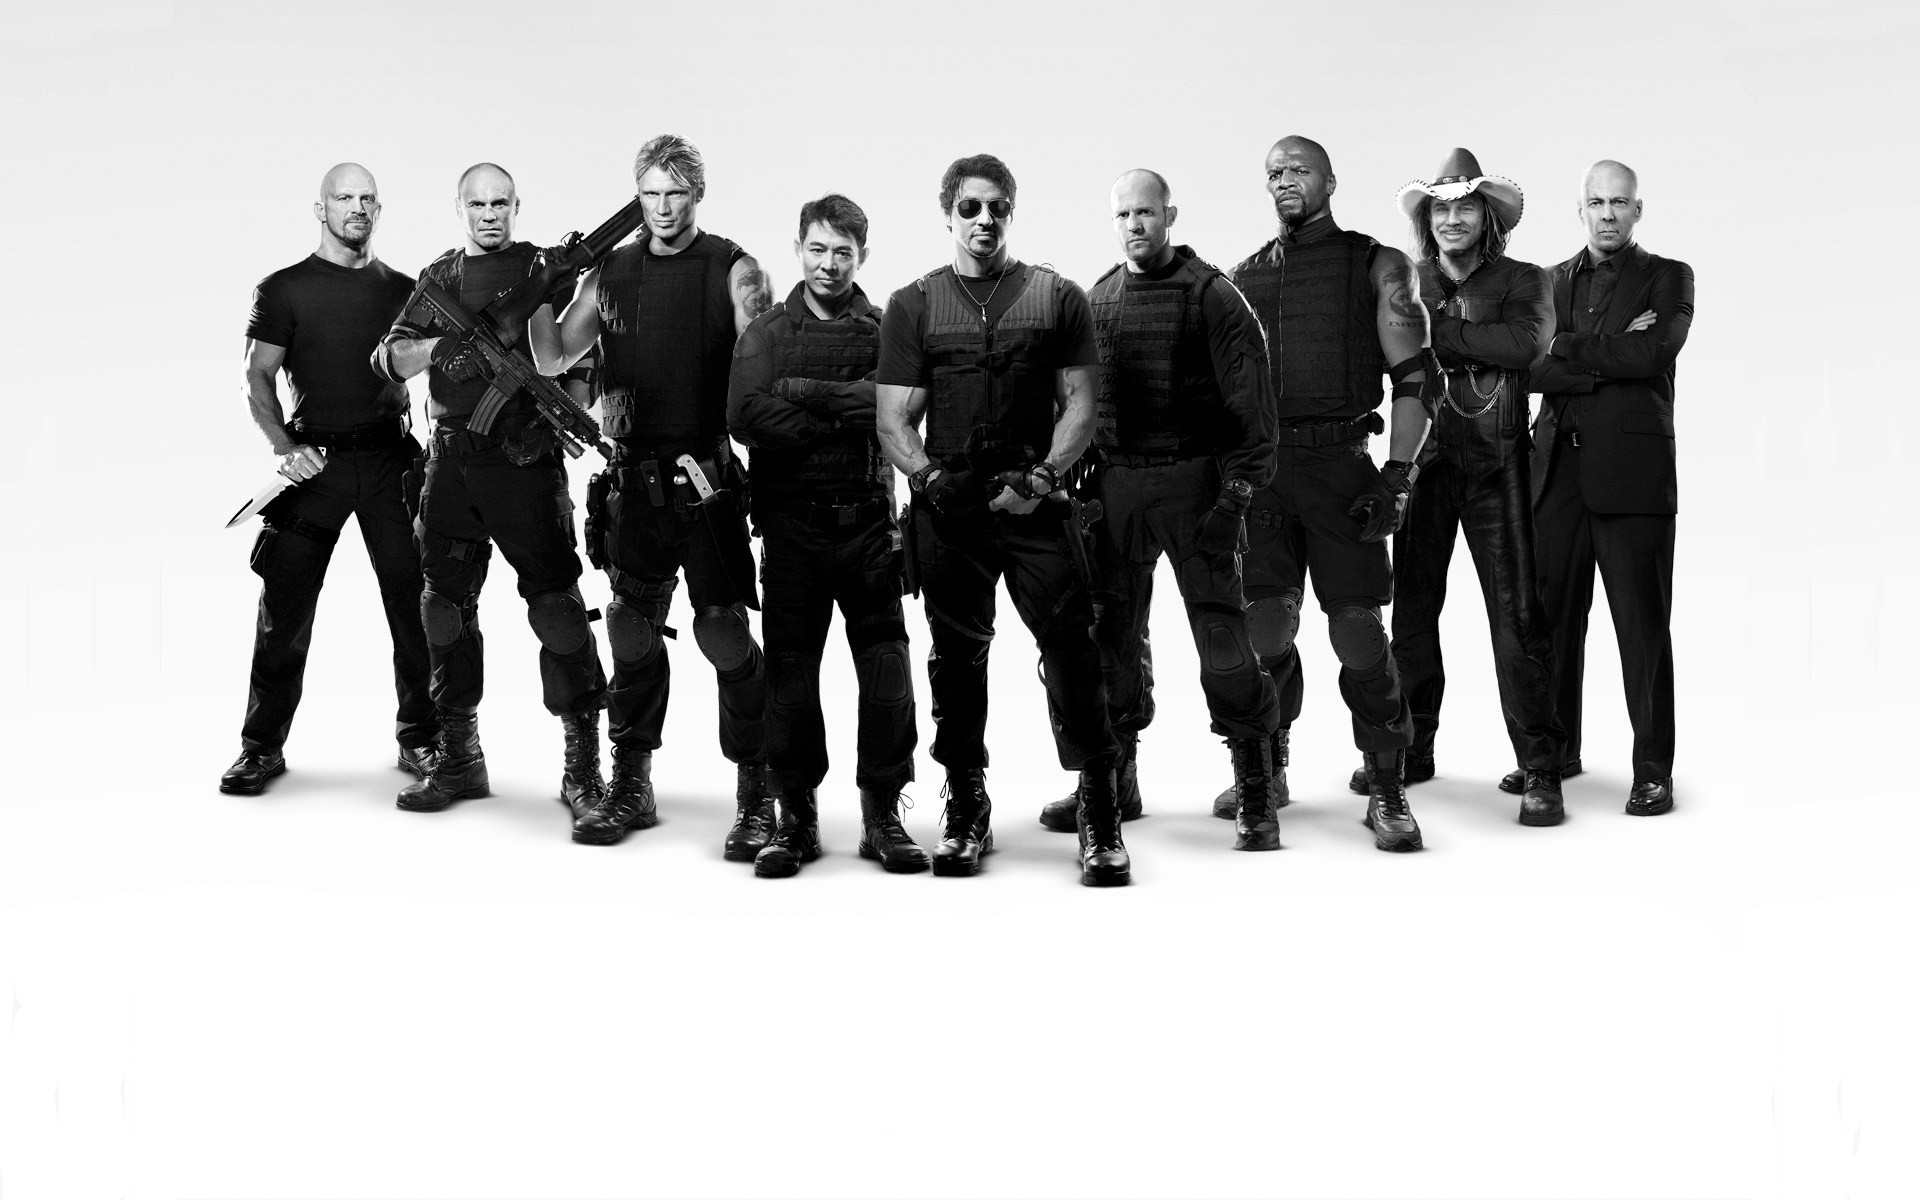 movie, the expendables, barney ross, bruce willis, church (the expendables), dan paine, dolph lundgren, gunnar jensen, hale caesar, jason statham, jet li, lee christmas, mickey rourke, randy couture, steve austin, sylvester stallone, terry crews, toll road, tool (the expendables), yin yang (the expendables) Full HD